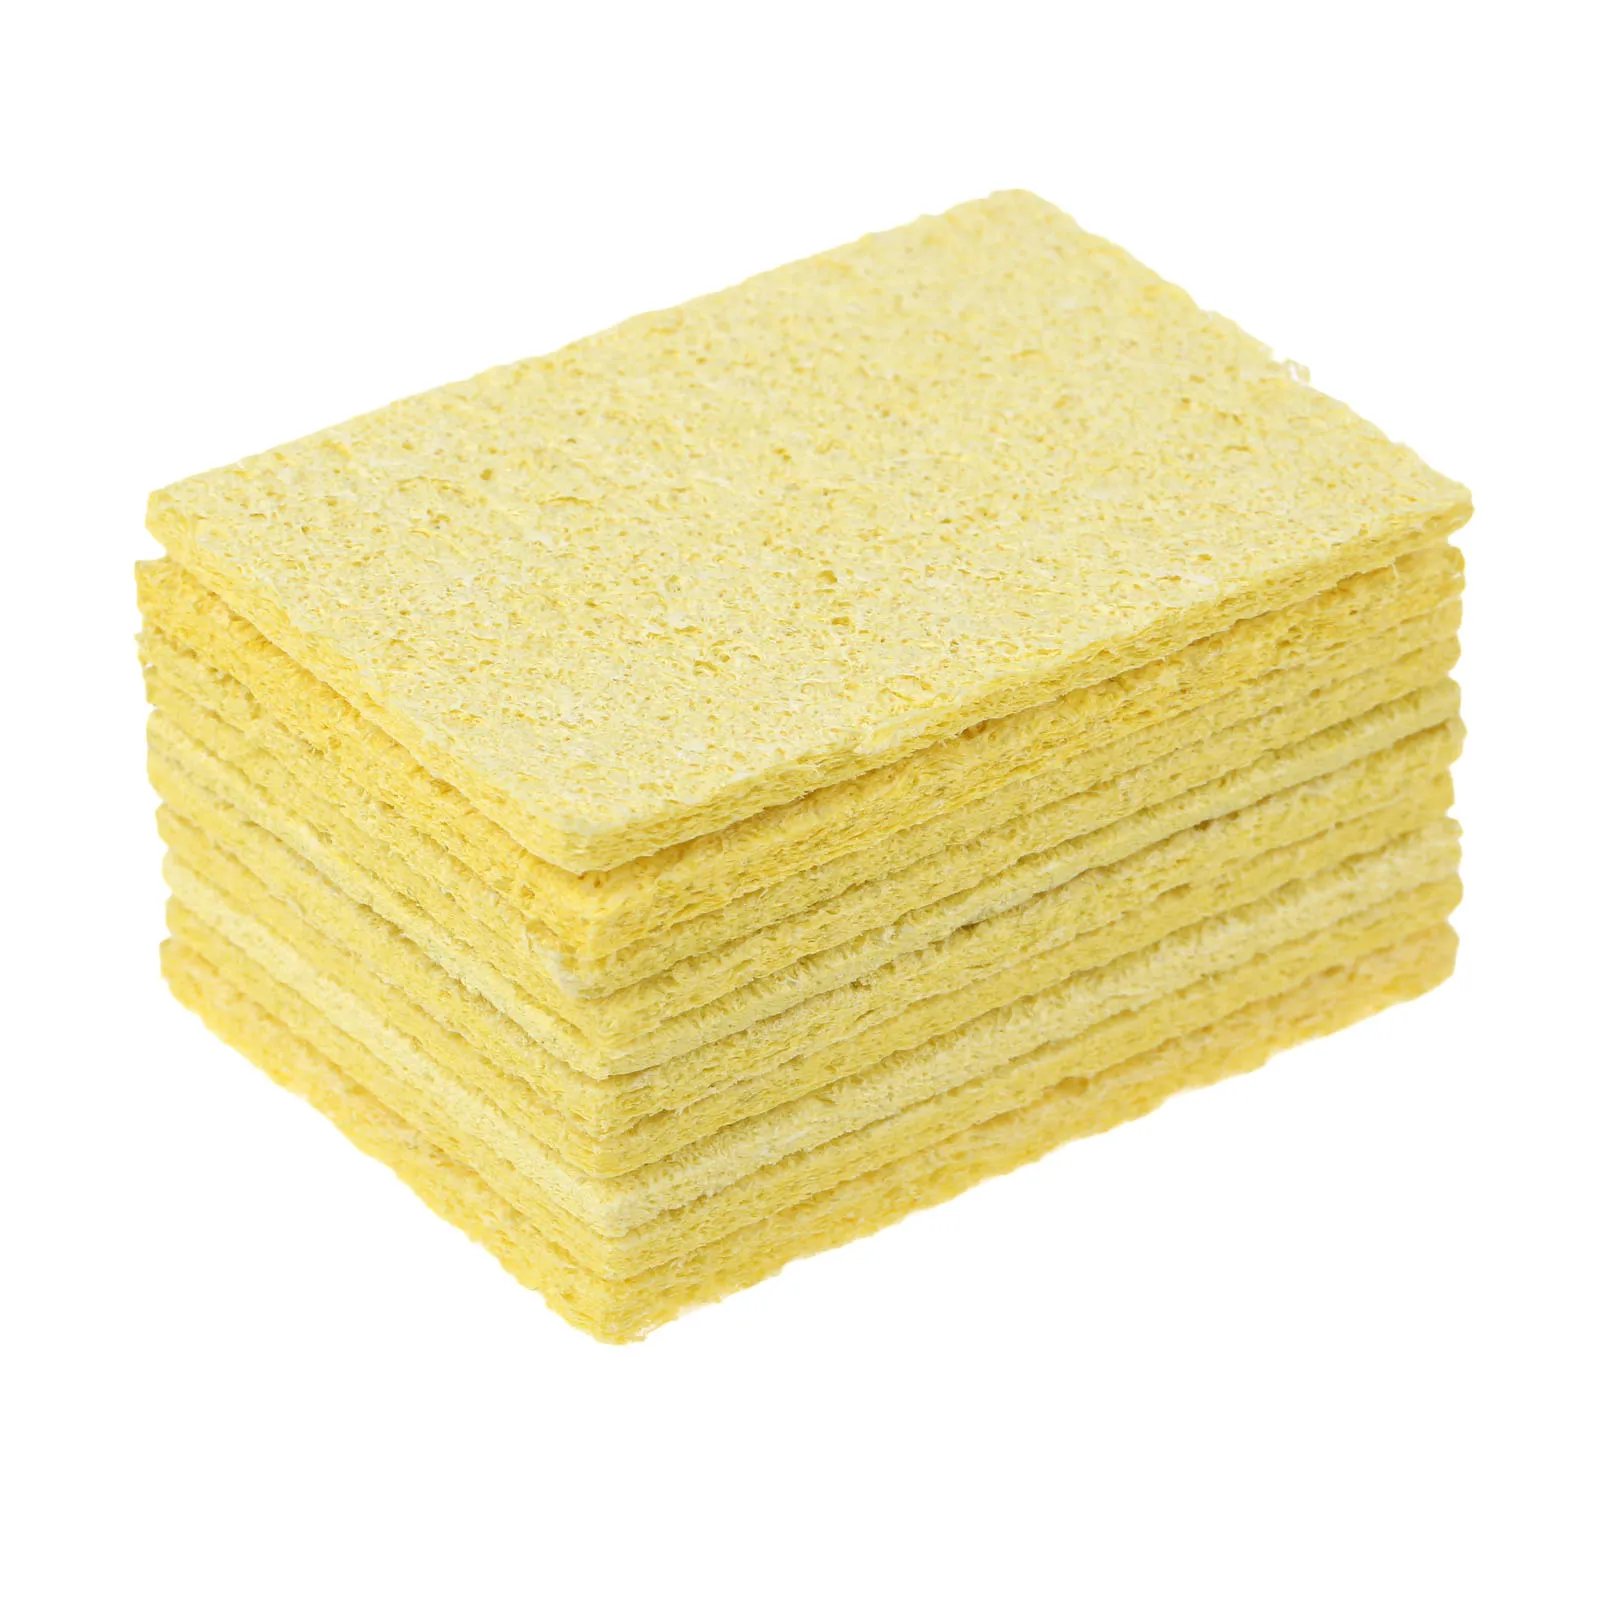 

DRELD 10pcs 50*35*3mm Electric Welding Soldering Iron Cleaning Sponge Pads Yellow High Temperature Enduring Condense Clean Tools